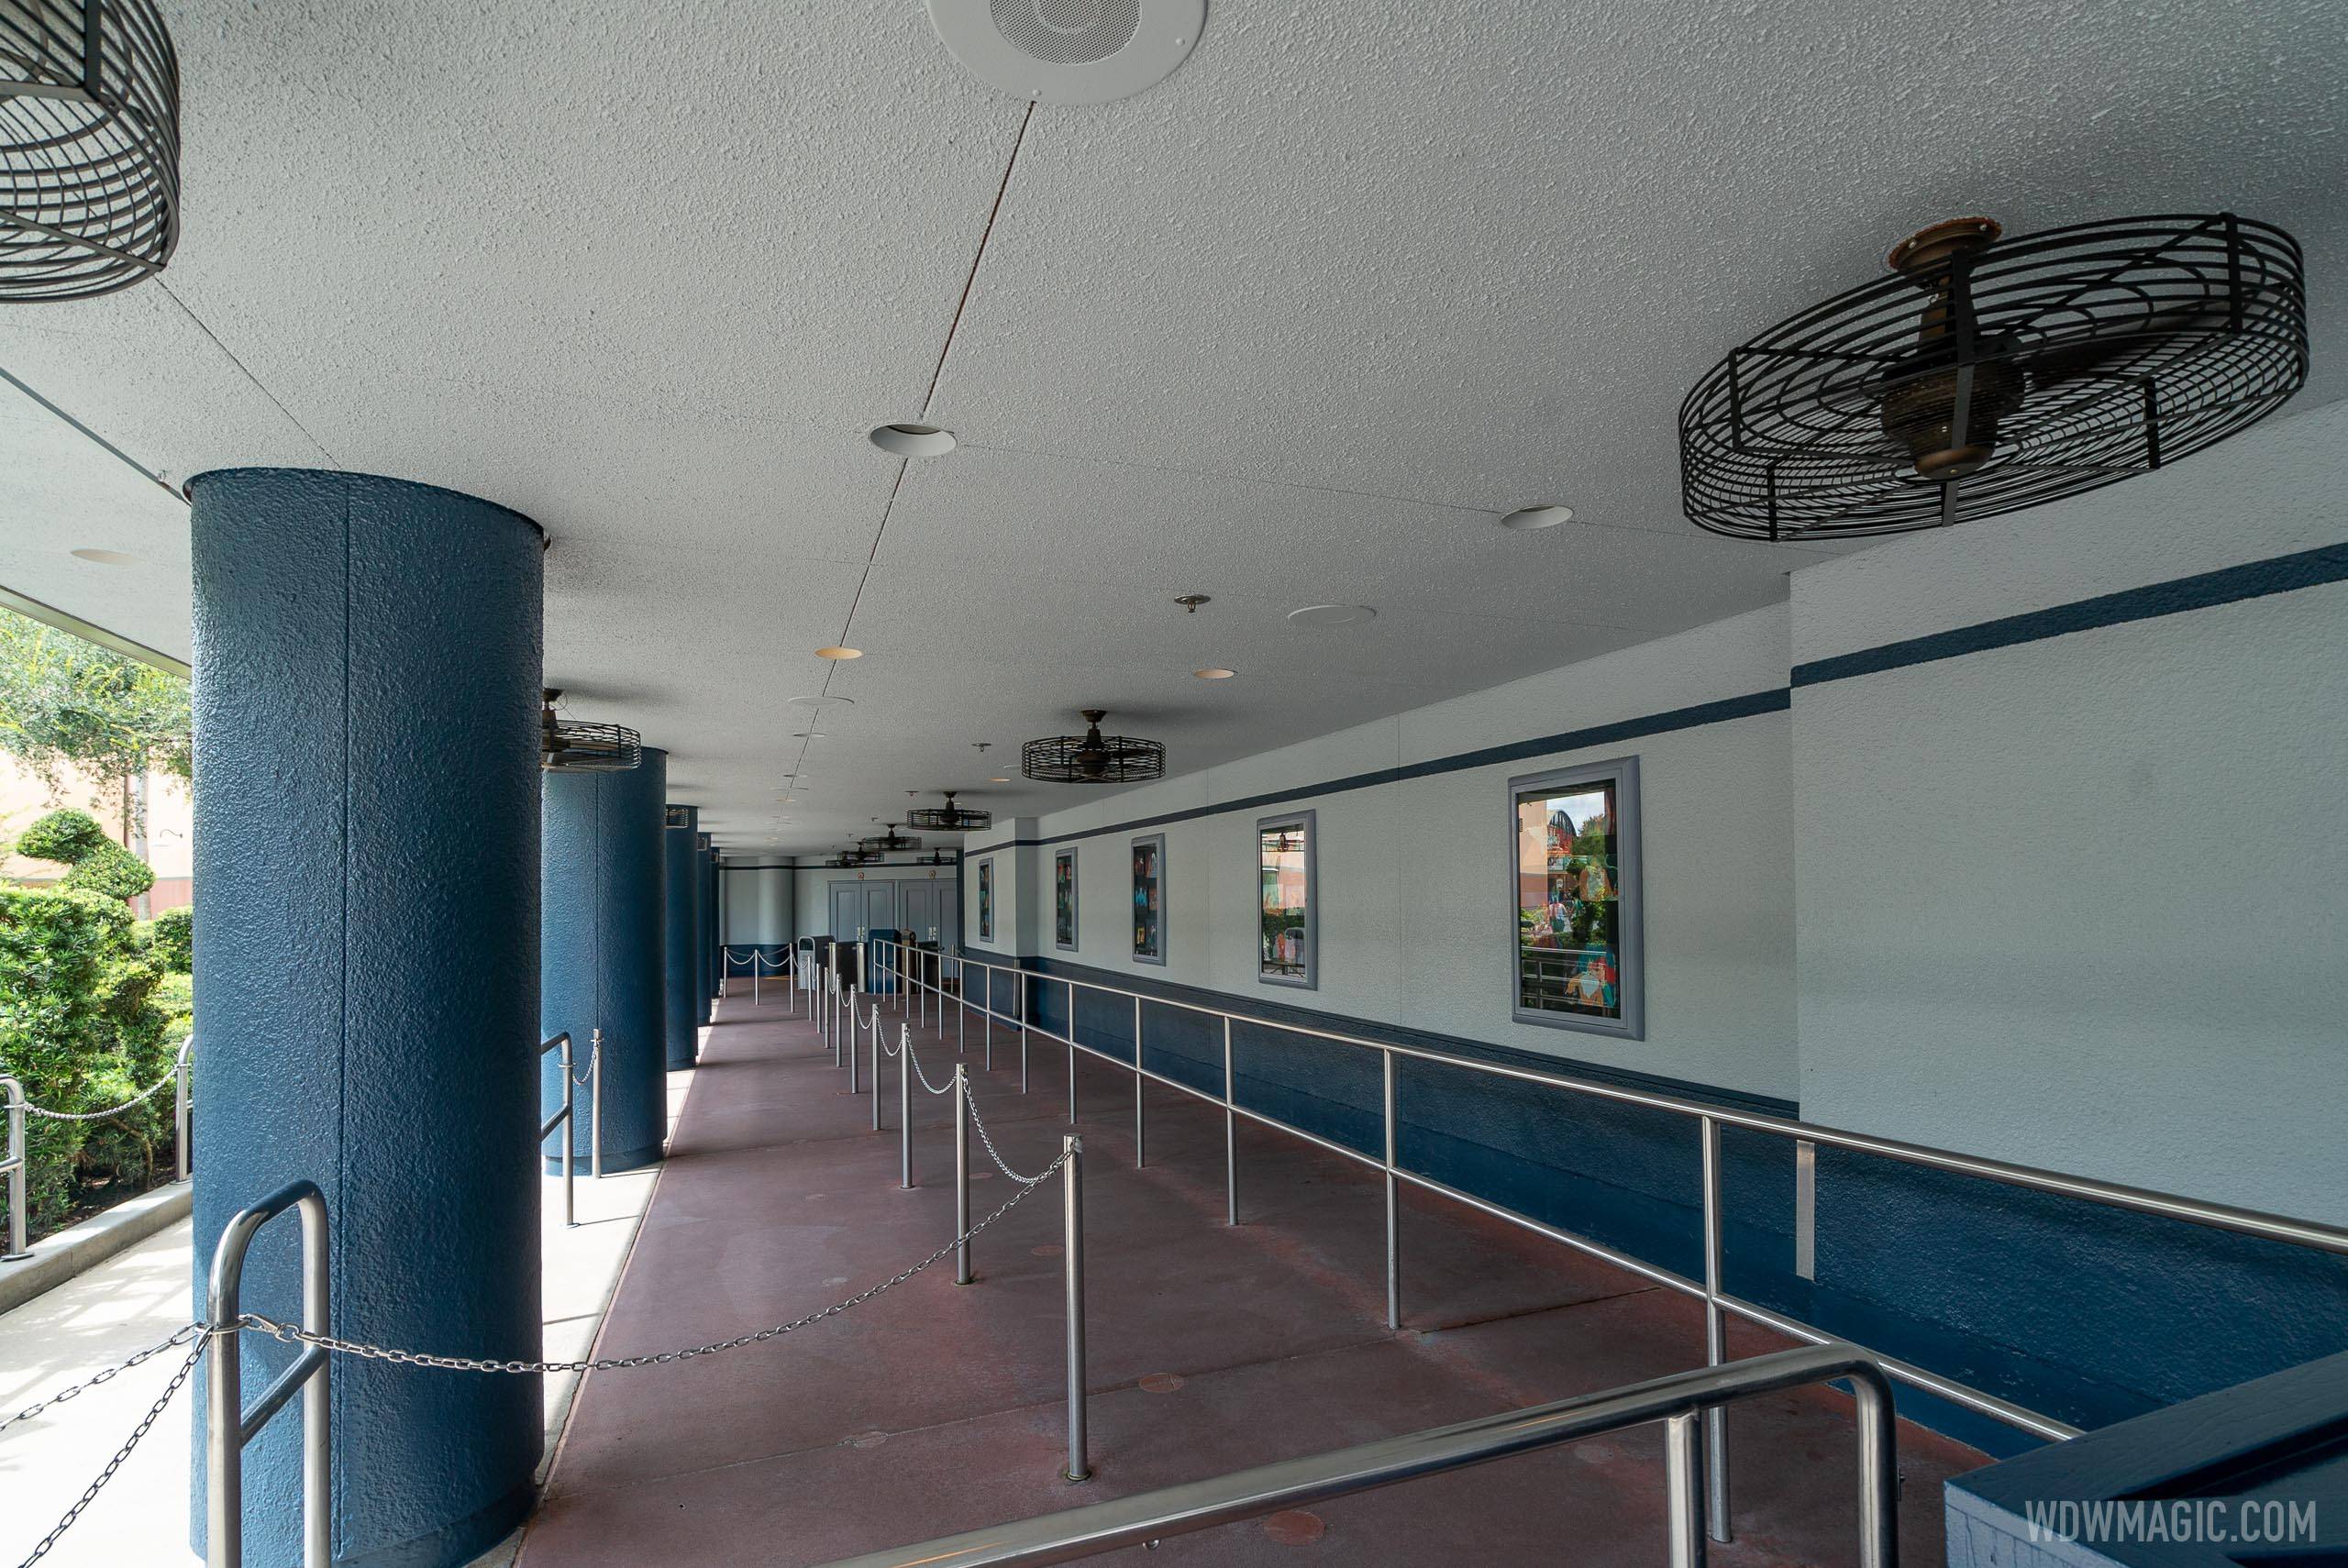 Voyage of the Little Mermaid overview